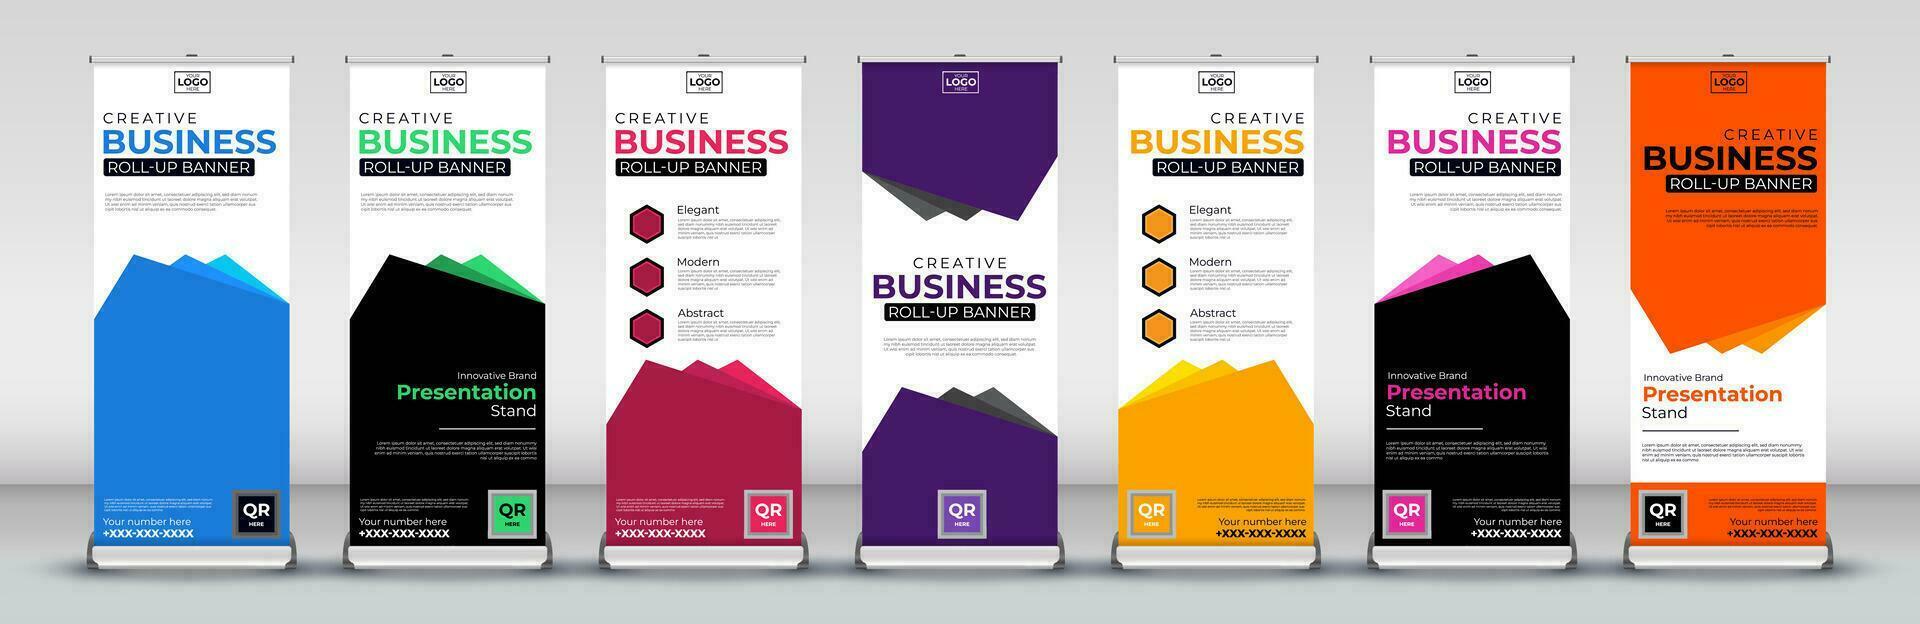 Roll up banner design template for business events, annual meetings, presentations, marketing, promotions, with red, blue, green, orange, pink, yellow and purple print ready colors vector